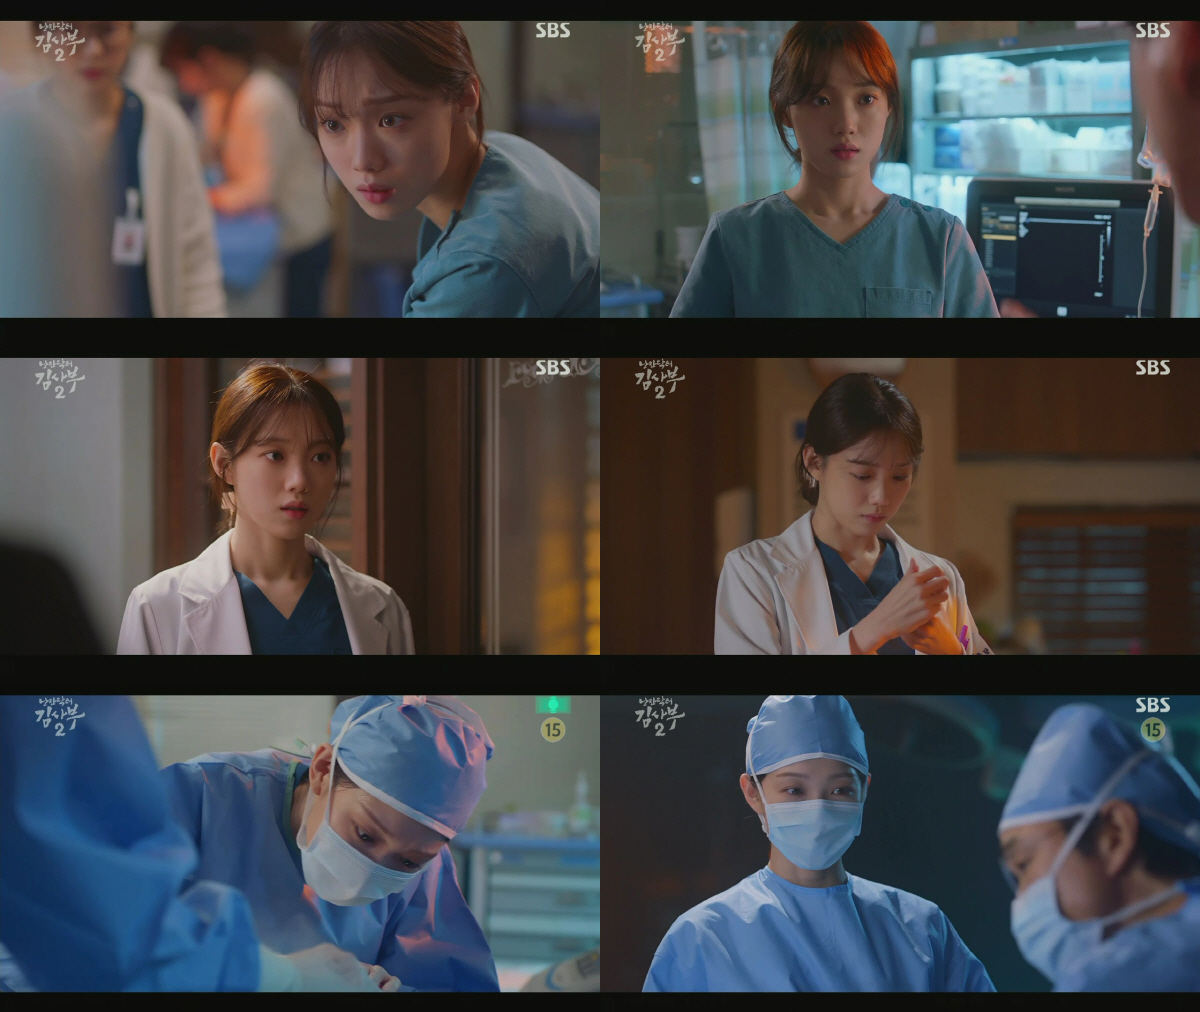 Actor Lee Sung-kyung is being cheered for growth-type characterIn the 6th episode of SBS drama Romantic Doctor Kim Sabu 2 (playplayed by Kang Eun-kyung, directed by Yoo In-sik, Lee Gil-bok) broadcasted on the 21st, Cha Eun-jae (Lee Sung-kyung) overcomes Nausea and successfully completes emergency surgery was drawn.Due to the trauma patients who suddenly came in on the day, Doldam Hospital became a mess.In an urgent situation where the operating room is insufficient and the operation area is to be opened in the emergency room, Eunjae is in charge of emergency treatment of the knifed tissue boss.Even if he was not confident, he said he would give up without hesitation.As he lived up to Kim Sa-bu (Han Seok-gyu), Eun-jae calmly and quickly caught the bleeding area and finished the surgery safely.In the previous 5 episodes, Kim Jae-jae, who had been taking the medicine he had given and serving the surgery without Nausea for the first time.I talked to my mother and said that I had done difficult surgery.As the society continues, viewers are crying, laughing and cheering together in the appearance of the silver that develops.I felt the tension in the operating room as if I were one with Character, and I looked at the surgical scene with sweat in my hand.Eunjae is not only overcoming his trauma, but also becoming mentally hard at Doldam Hospital.He also reminded Woojin (Ahn Hyo-seop) that he would not treat the patient, and he did not hesitate to say bitterness to the domestic violence criminal who wielded violence.After the mentor Kim Sabu, he is gradually being reborn as a true romantic doctor.Lee Sung-kyung brings sympathy to the viewers by showing such a synchro rate with the silver character.I am faithfully expressing the feeling of the person s feeling, which is bright and bright, but on the other hand, with pain and trauma.Among the events of the big and small Doldam Hospital, watching and supporting the growth of silver together adds another fun to watching Romantic Doctor Kim Sabu 2.SBS Romantic Doctor Kim Sabu 2 is a story about Real Doctor in the background of a poor stone wall hospital in the province. It is broadcast every Monday and Tuesday at 9:40 pm.